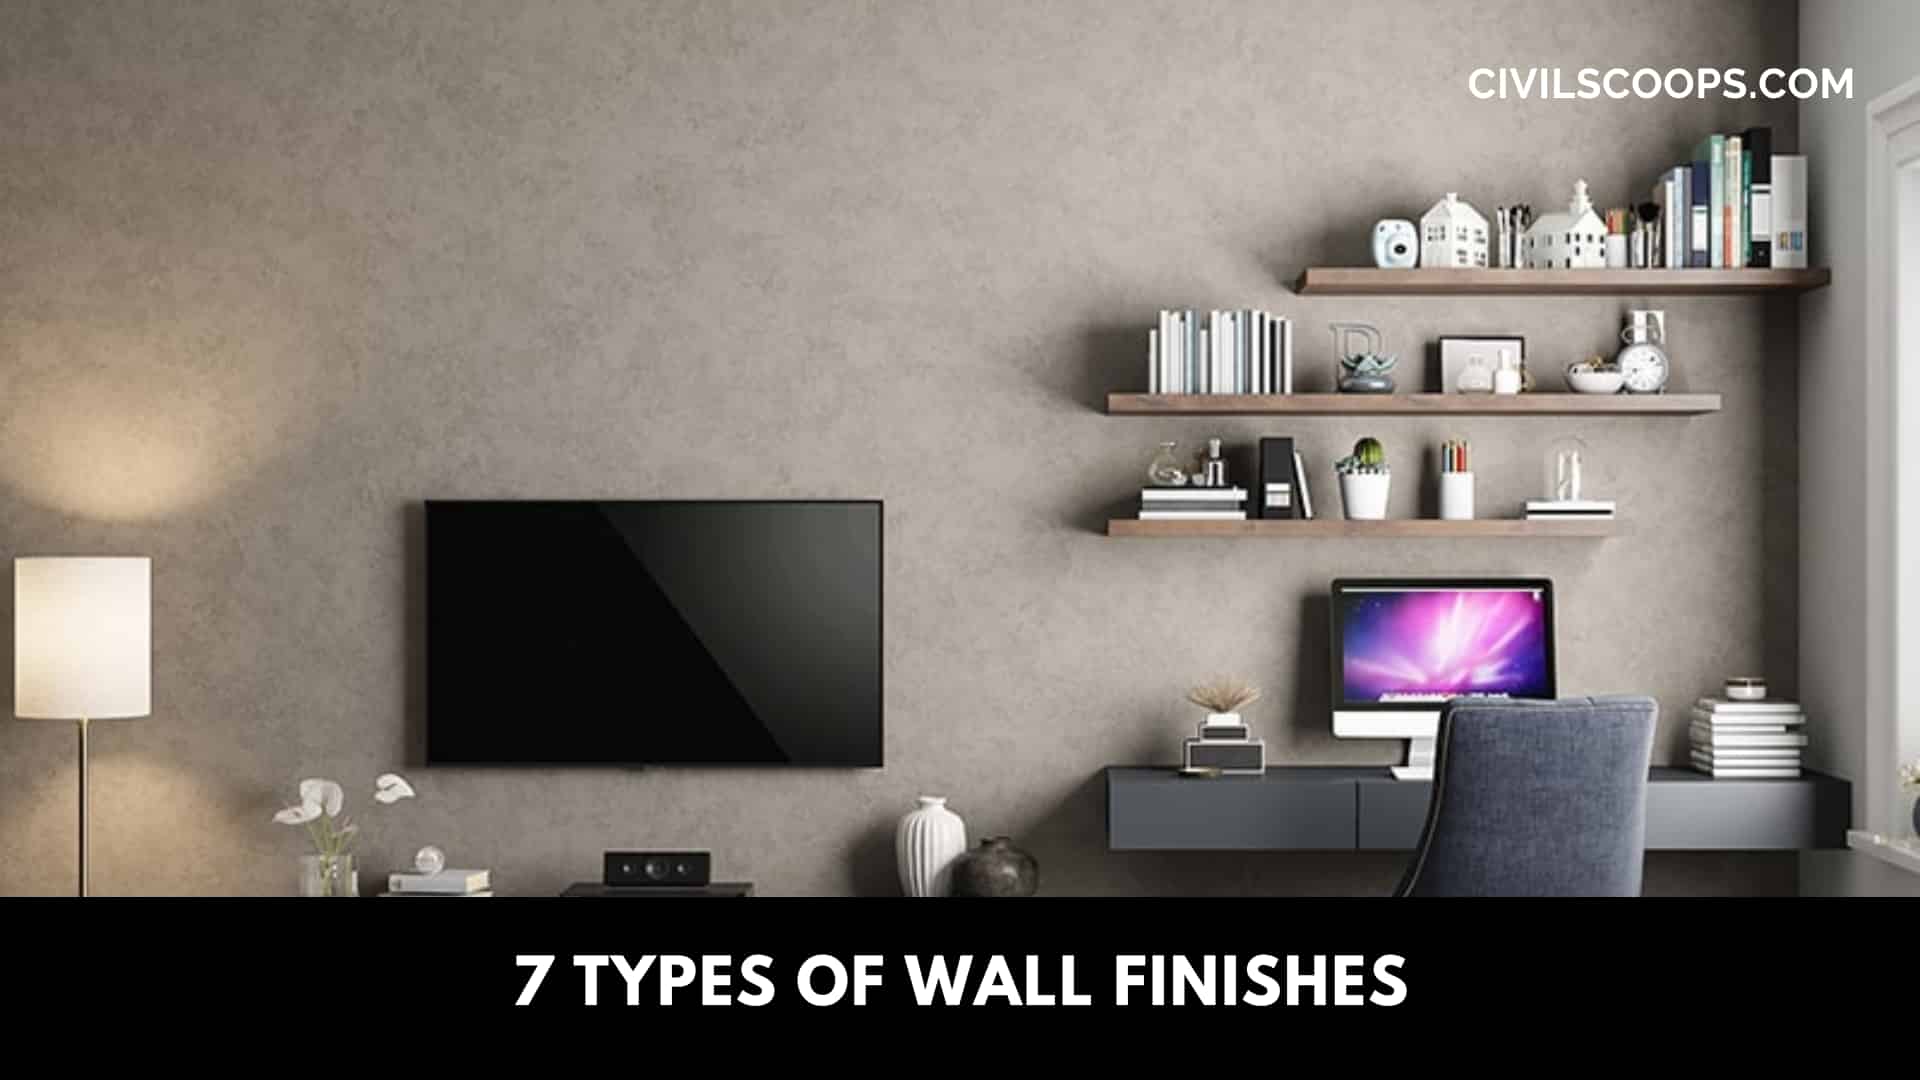 7 Types of Wall Finishes